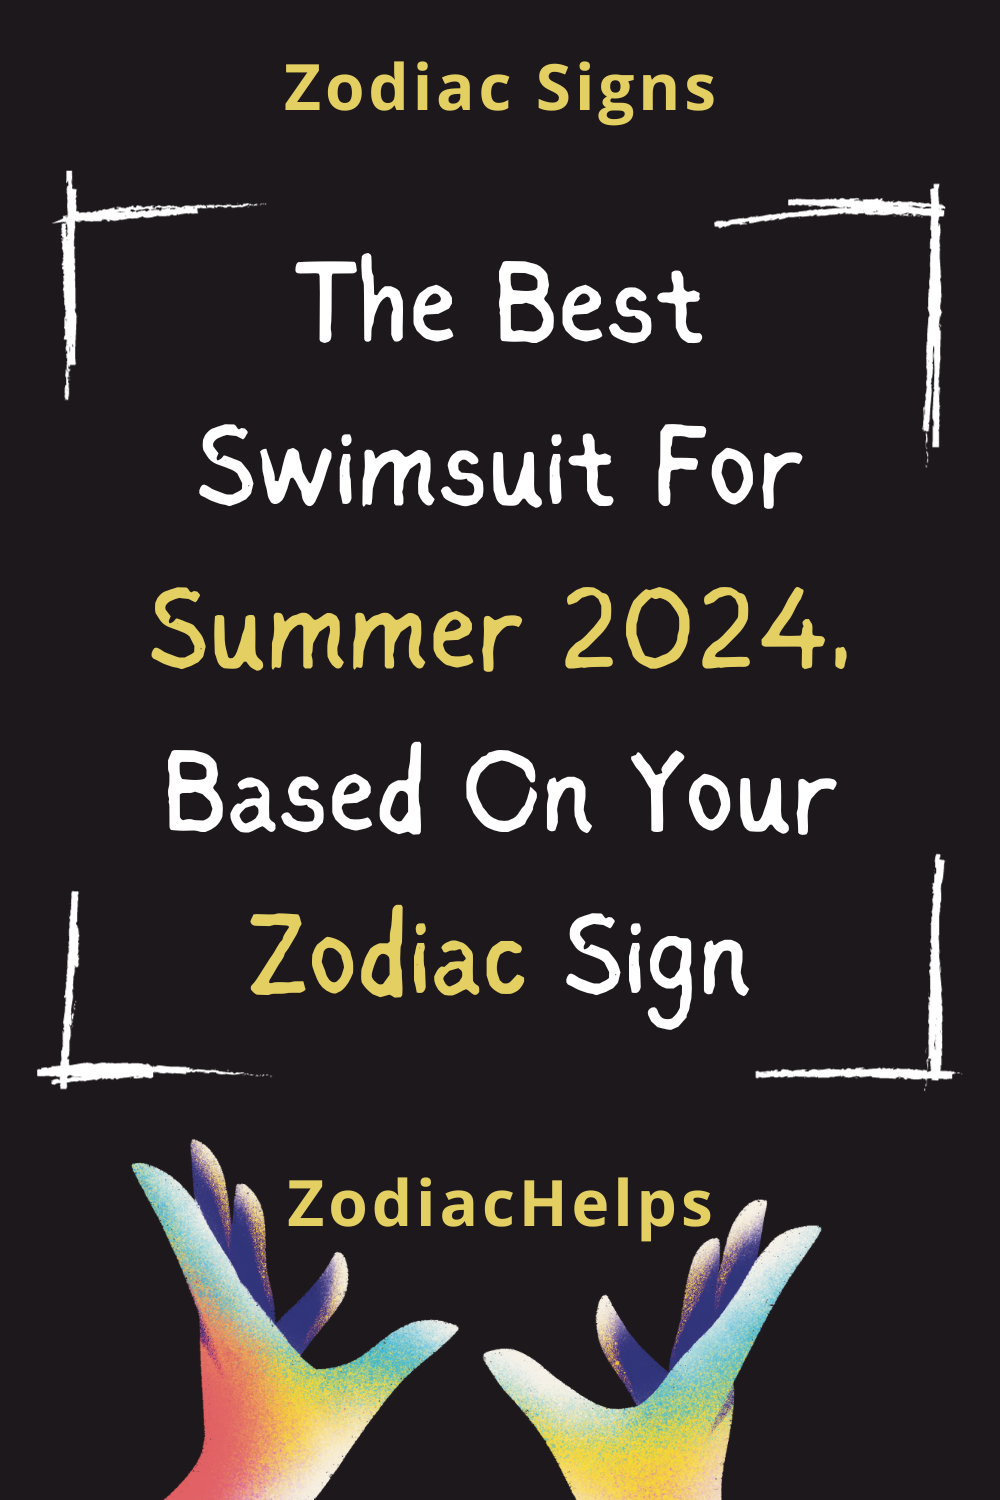 The Best Swimsuit For Summer 2024, Based On Your Zodiac Sign